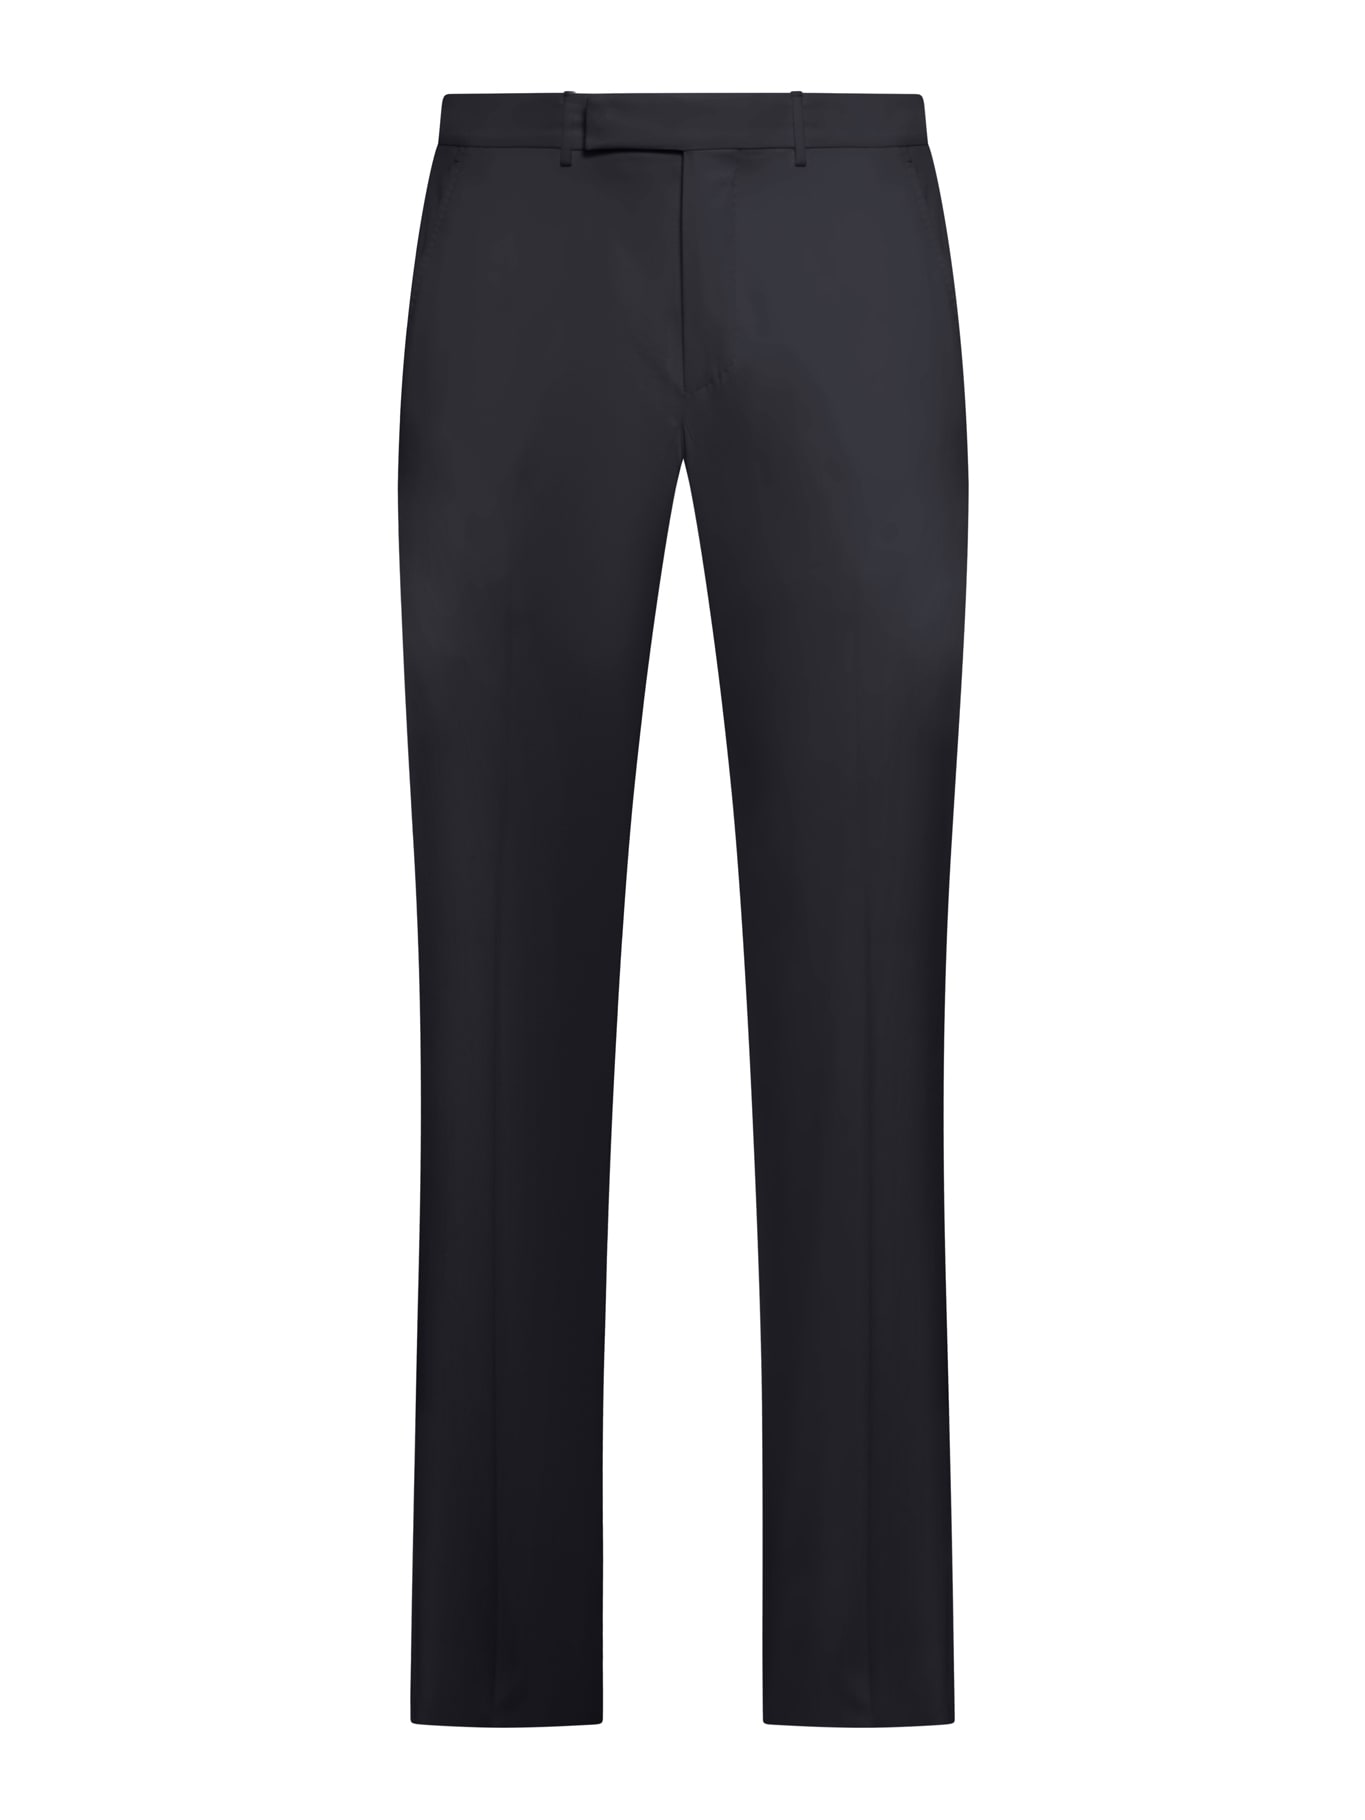 Zegna Trousers In Nvy Sld Navy